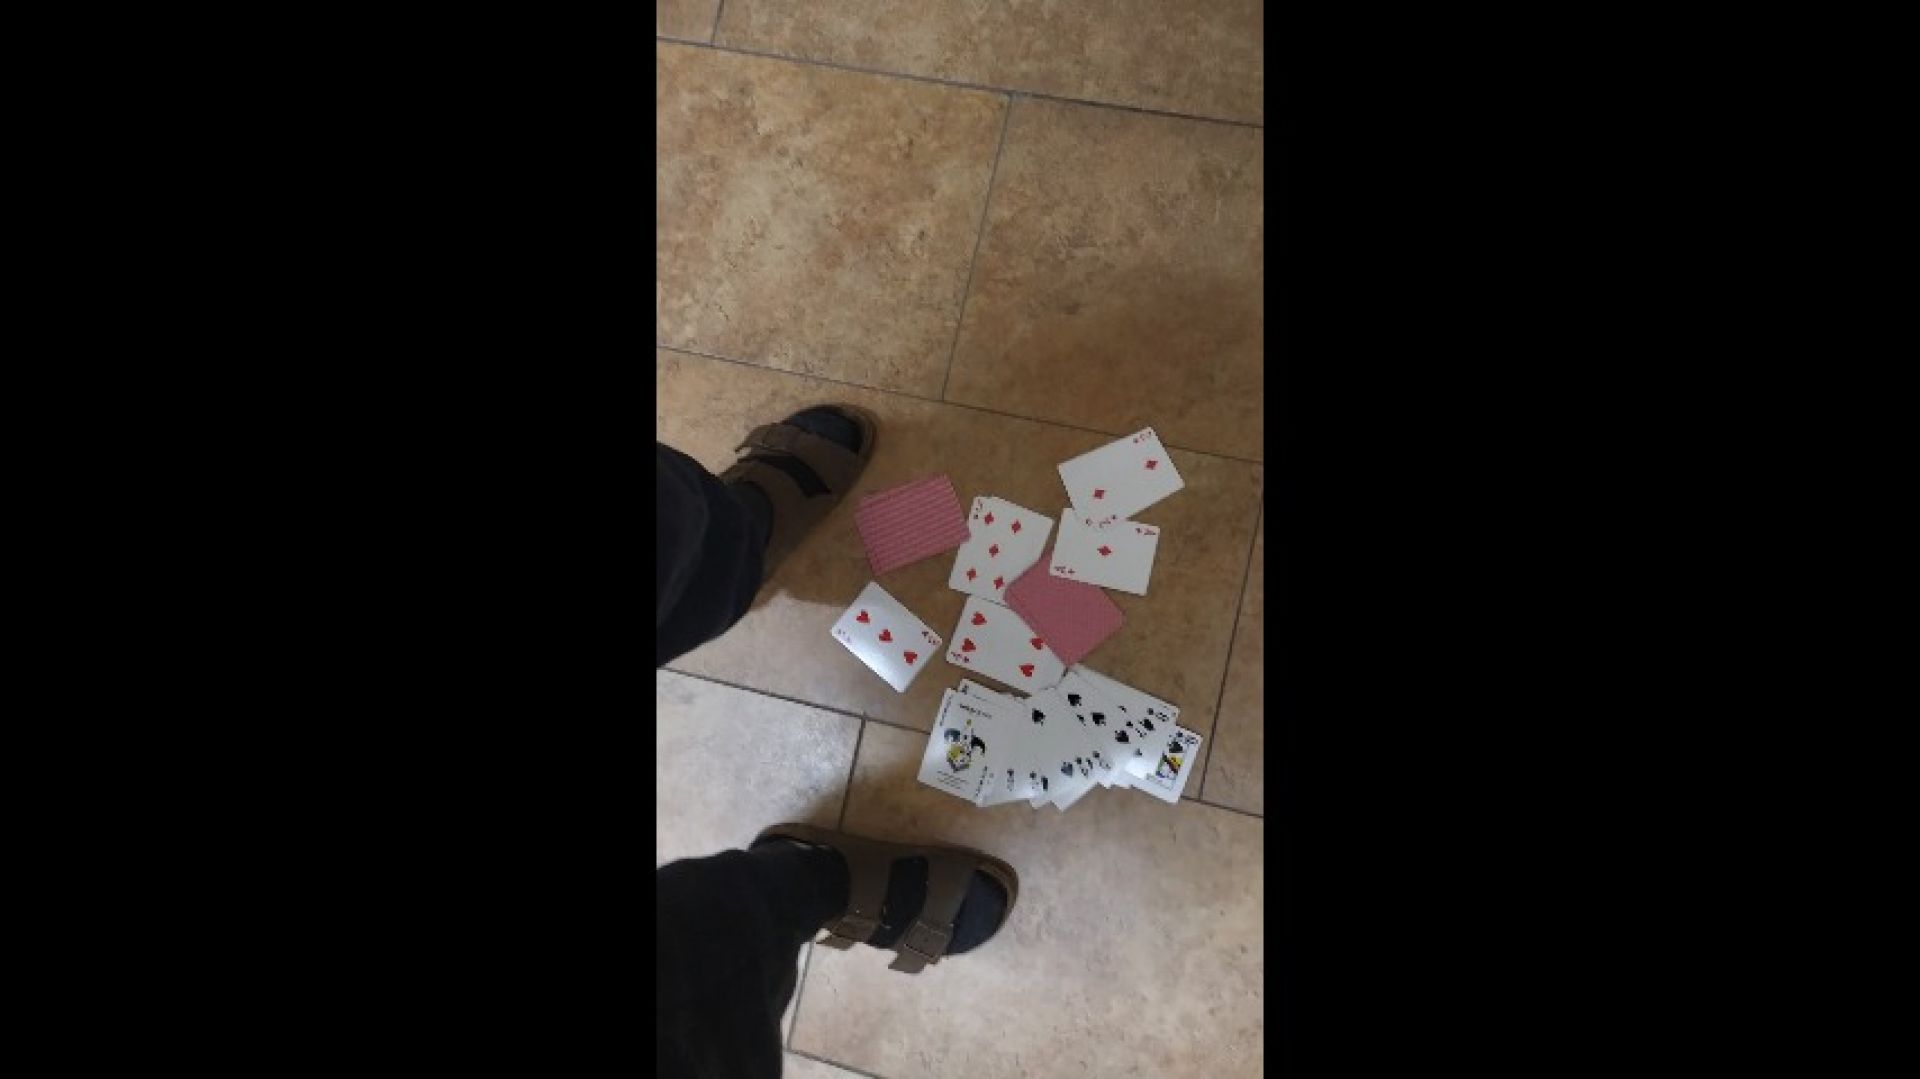 Would you play cards with me